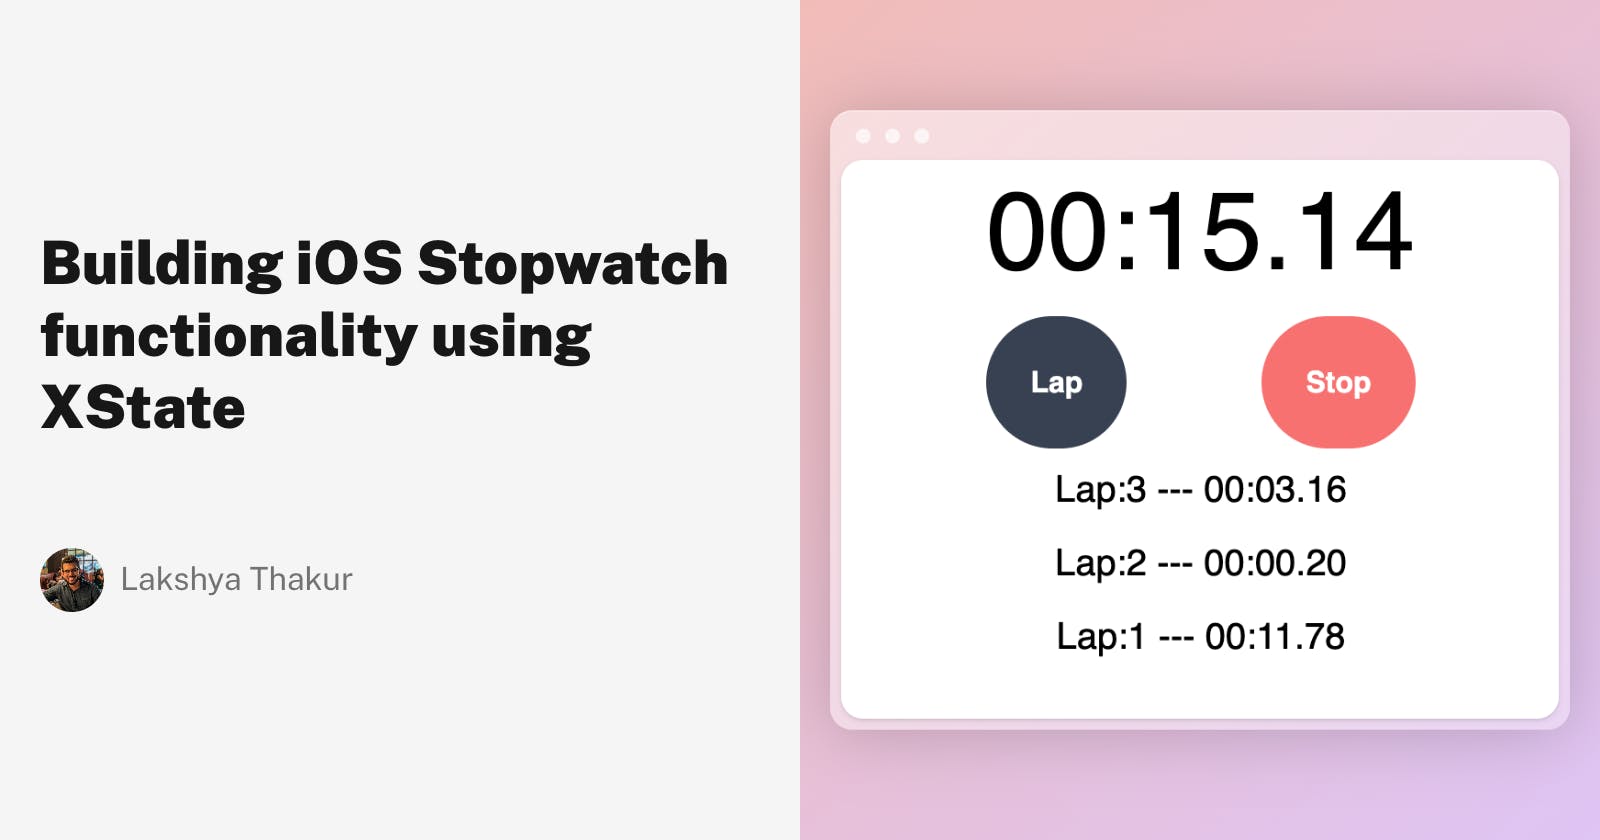 Building iOS Stopwatch functionality using XState